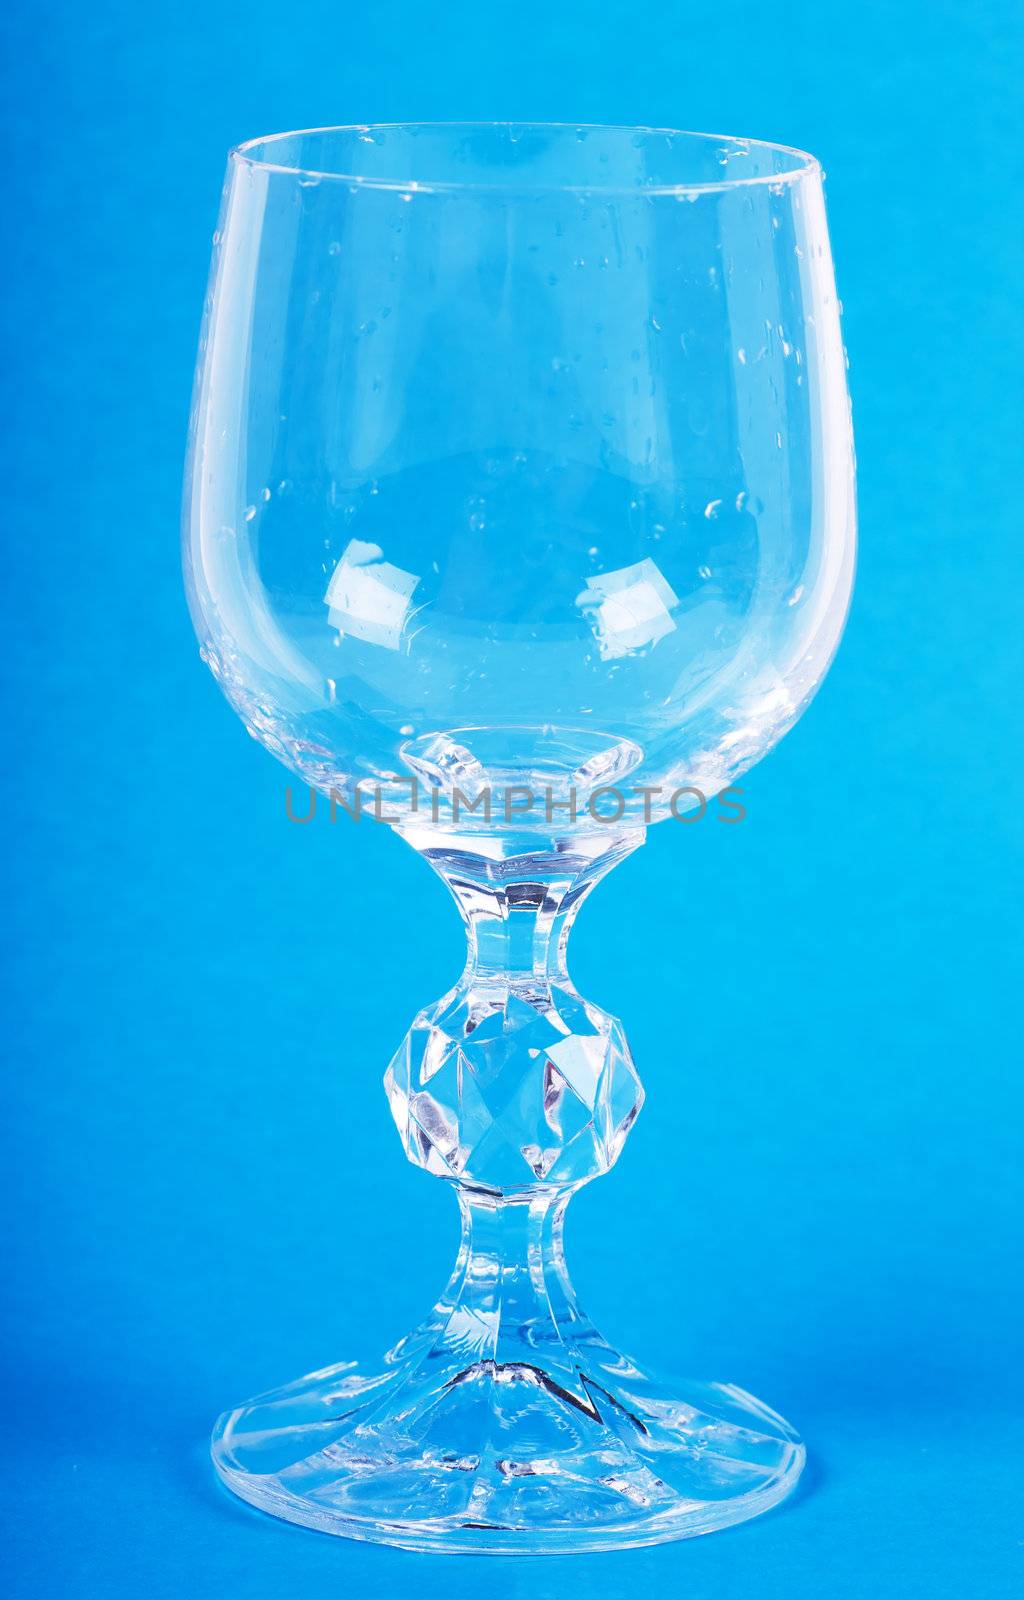 Empty wineglass with drops over blue background